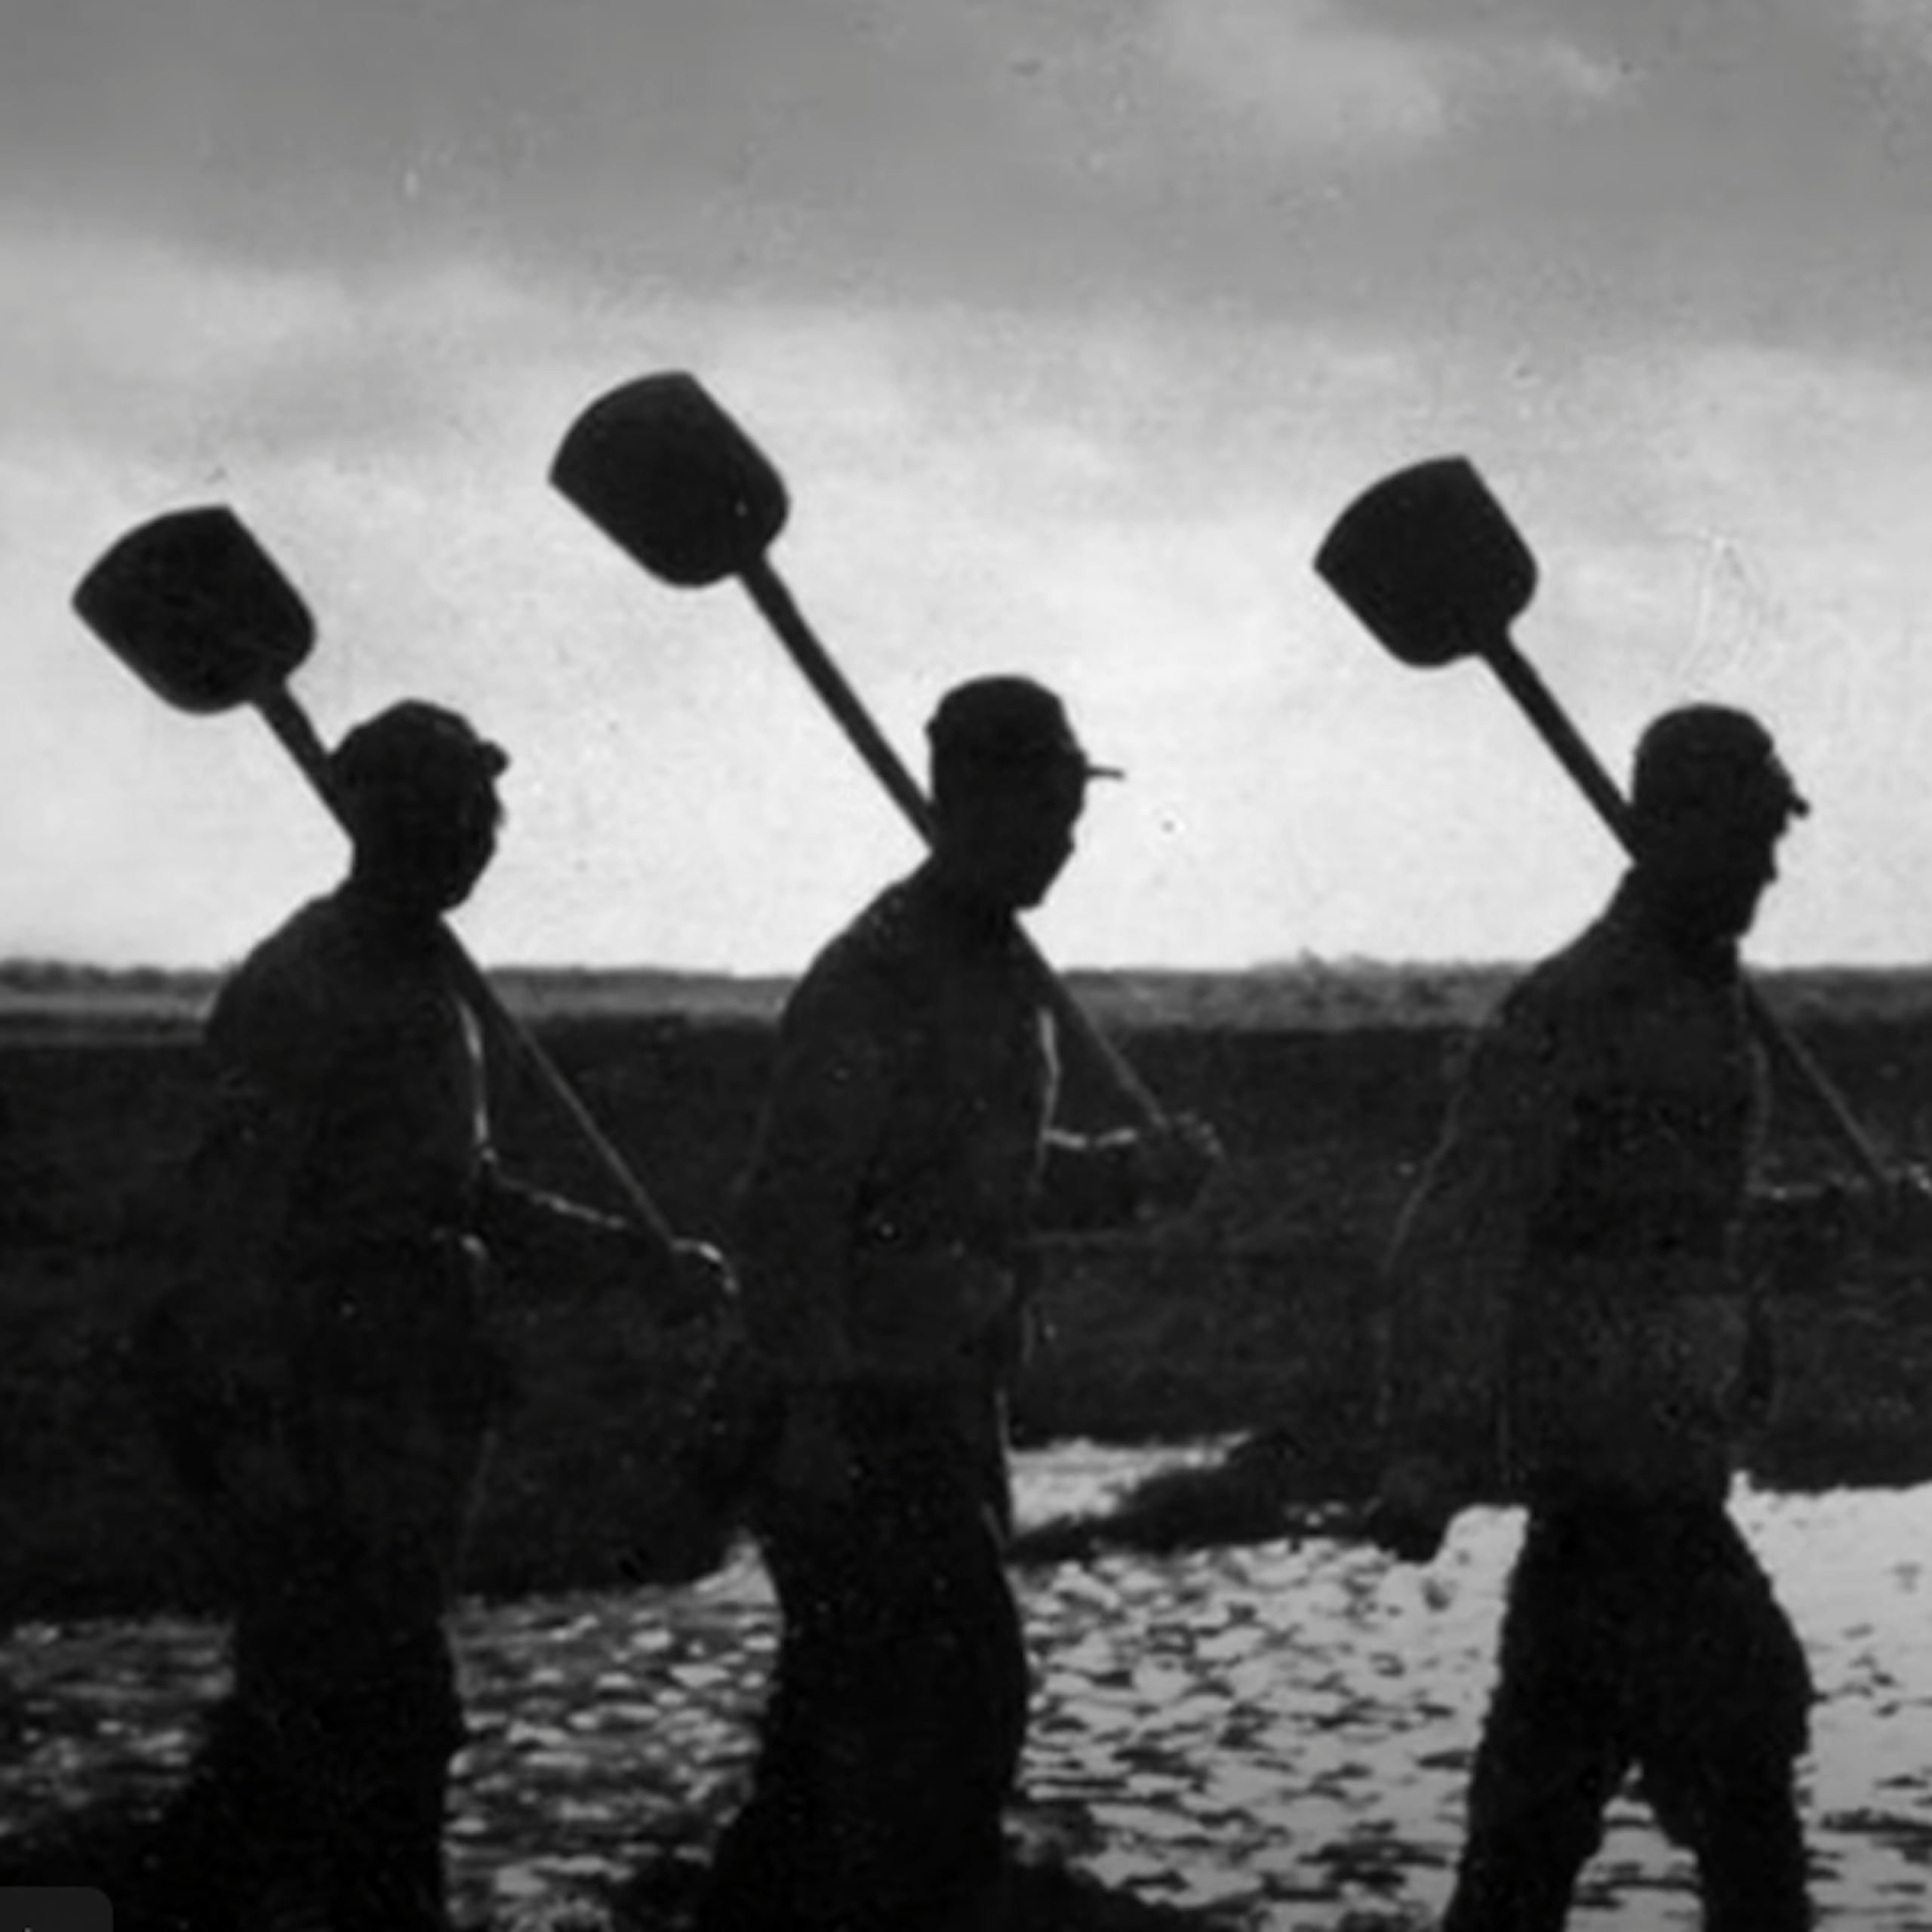 A group of men with shovels over their shoulders marching in a line silhouetted against the sky.